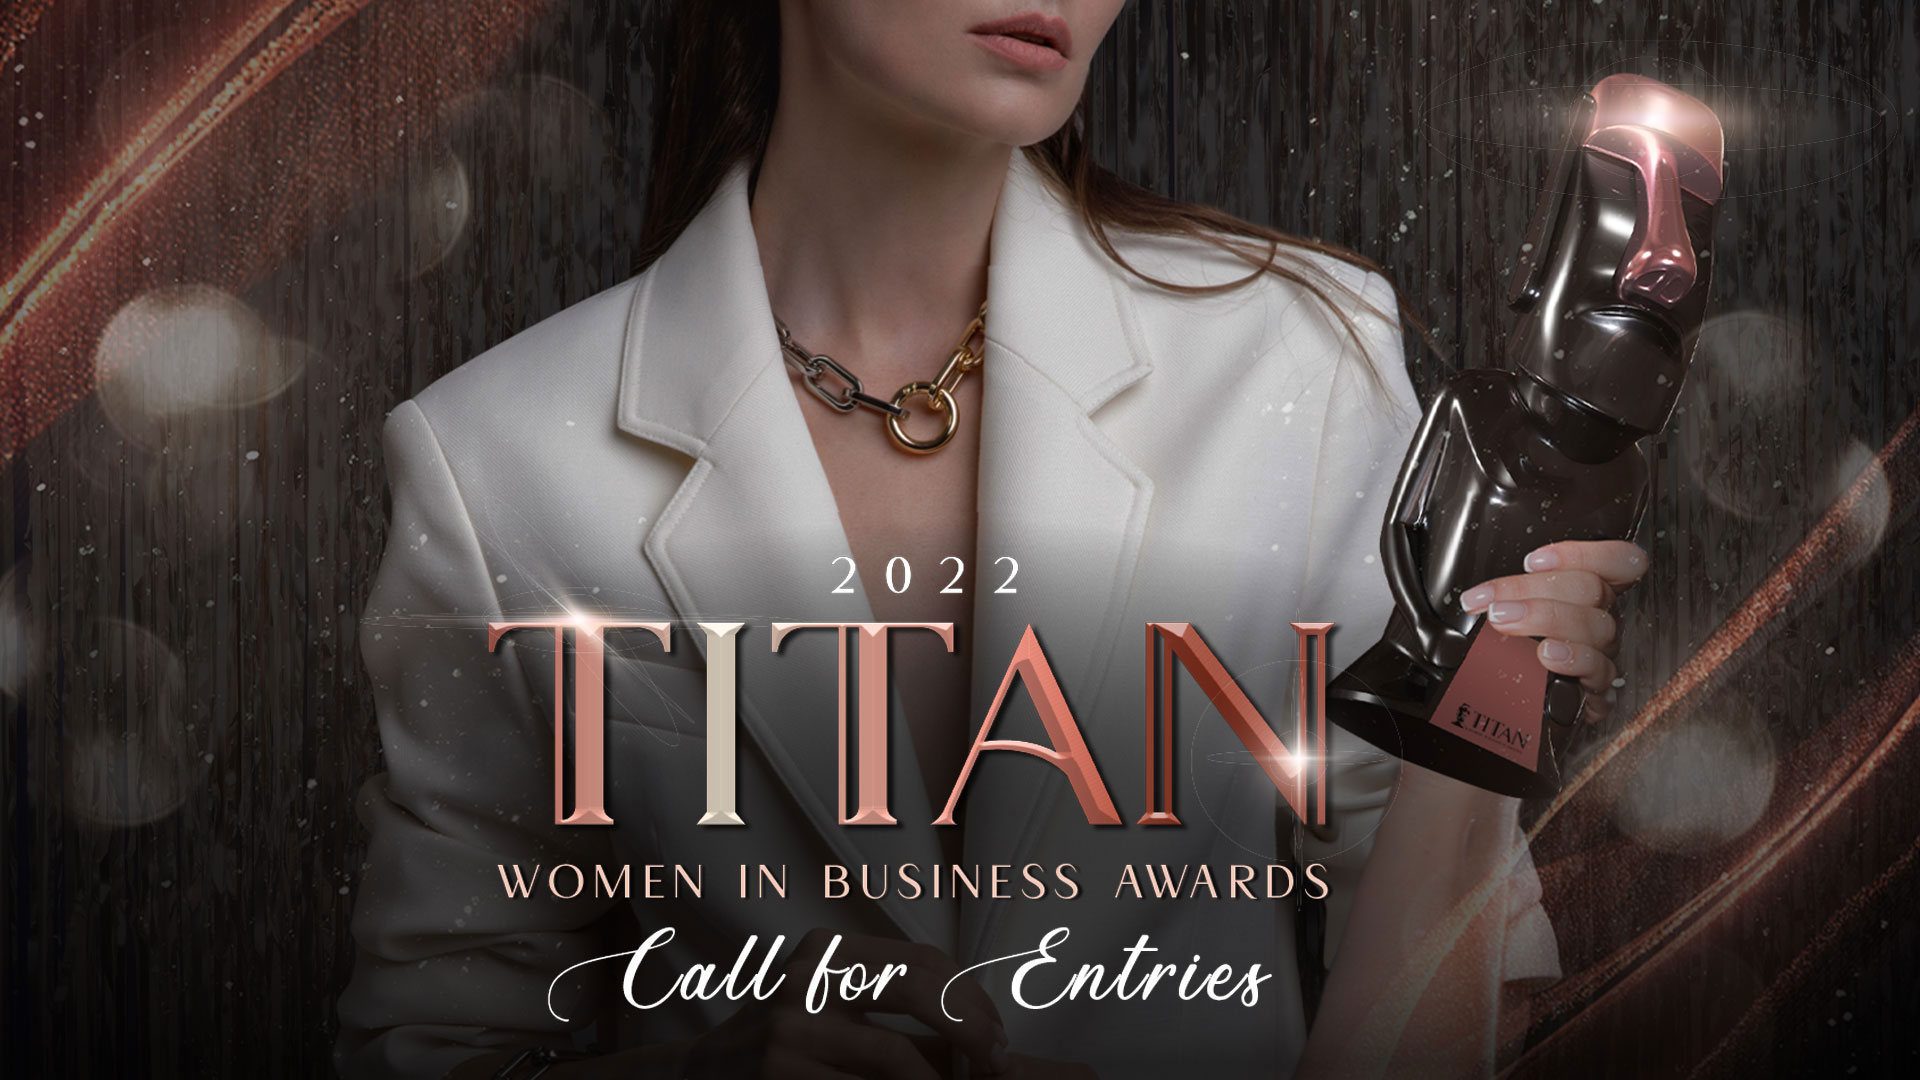 Embrace Female Achievements Globally with the 2022 TITAN Women In Business Awards